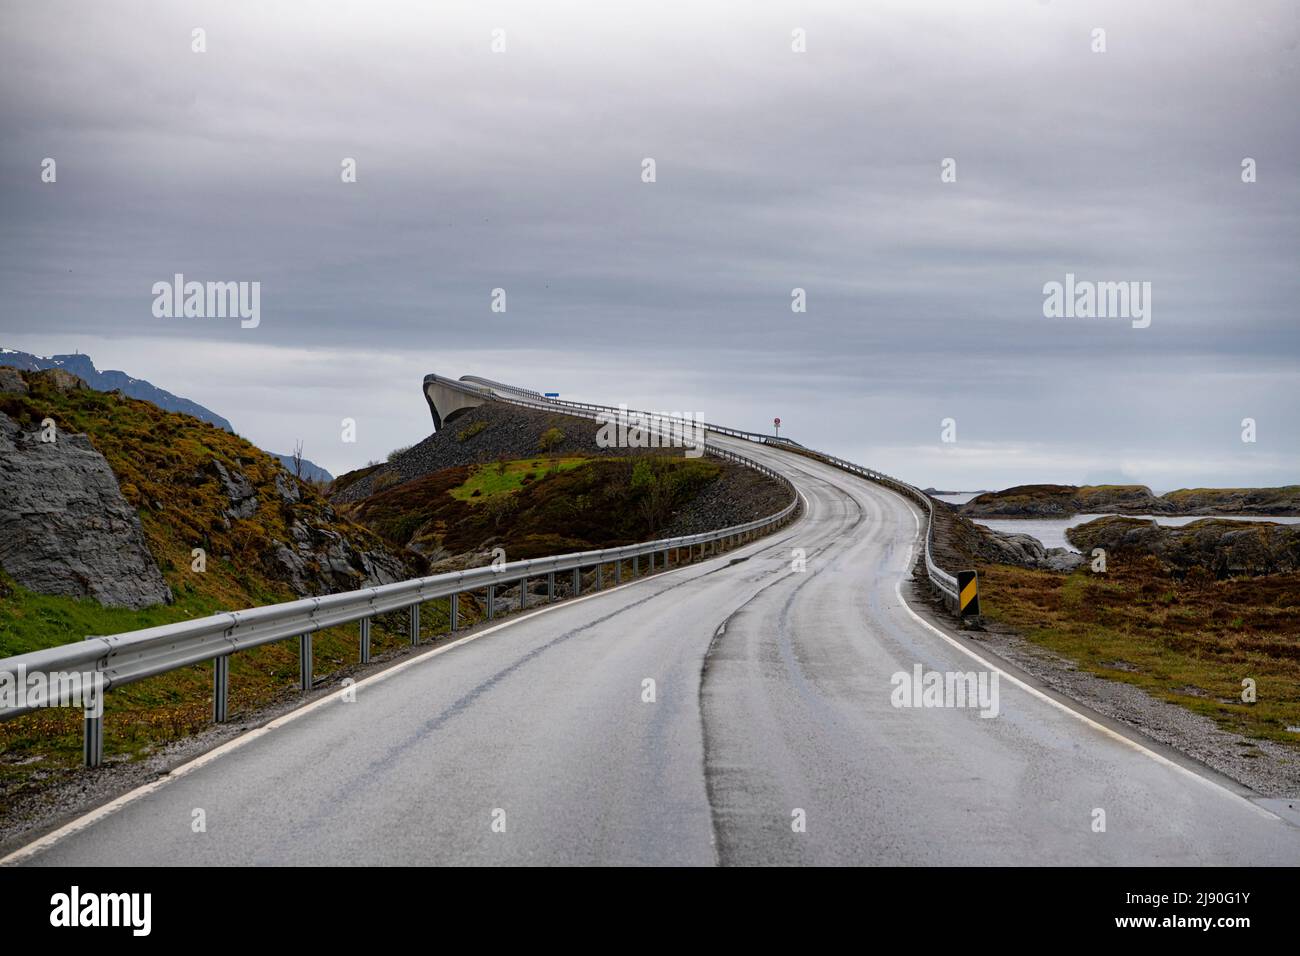 The Storseisundet Bridge,Located in the midwest part of the Norwegian coastline, cantilever bridge part of the Norway Atlantic higway Stock Photo